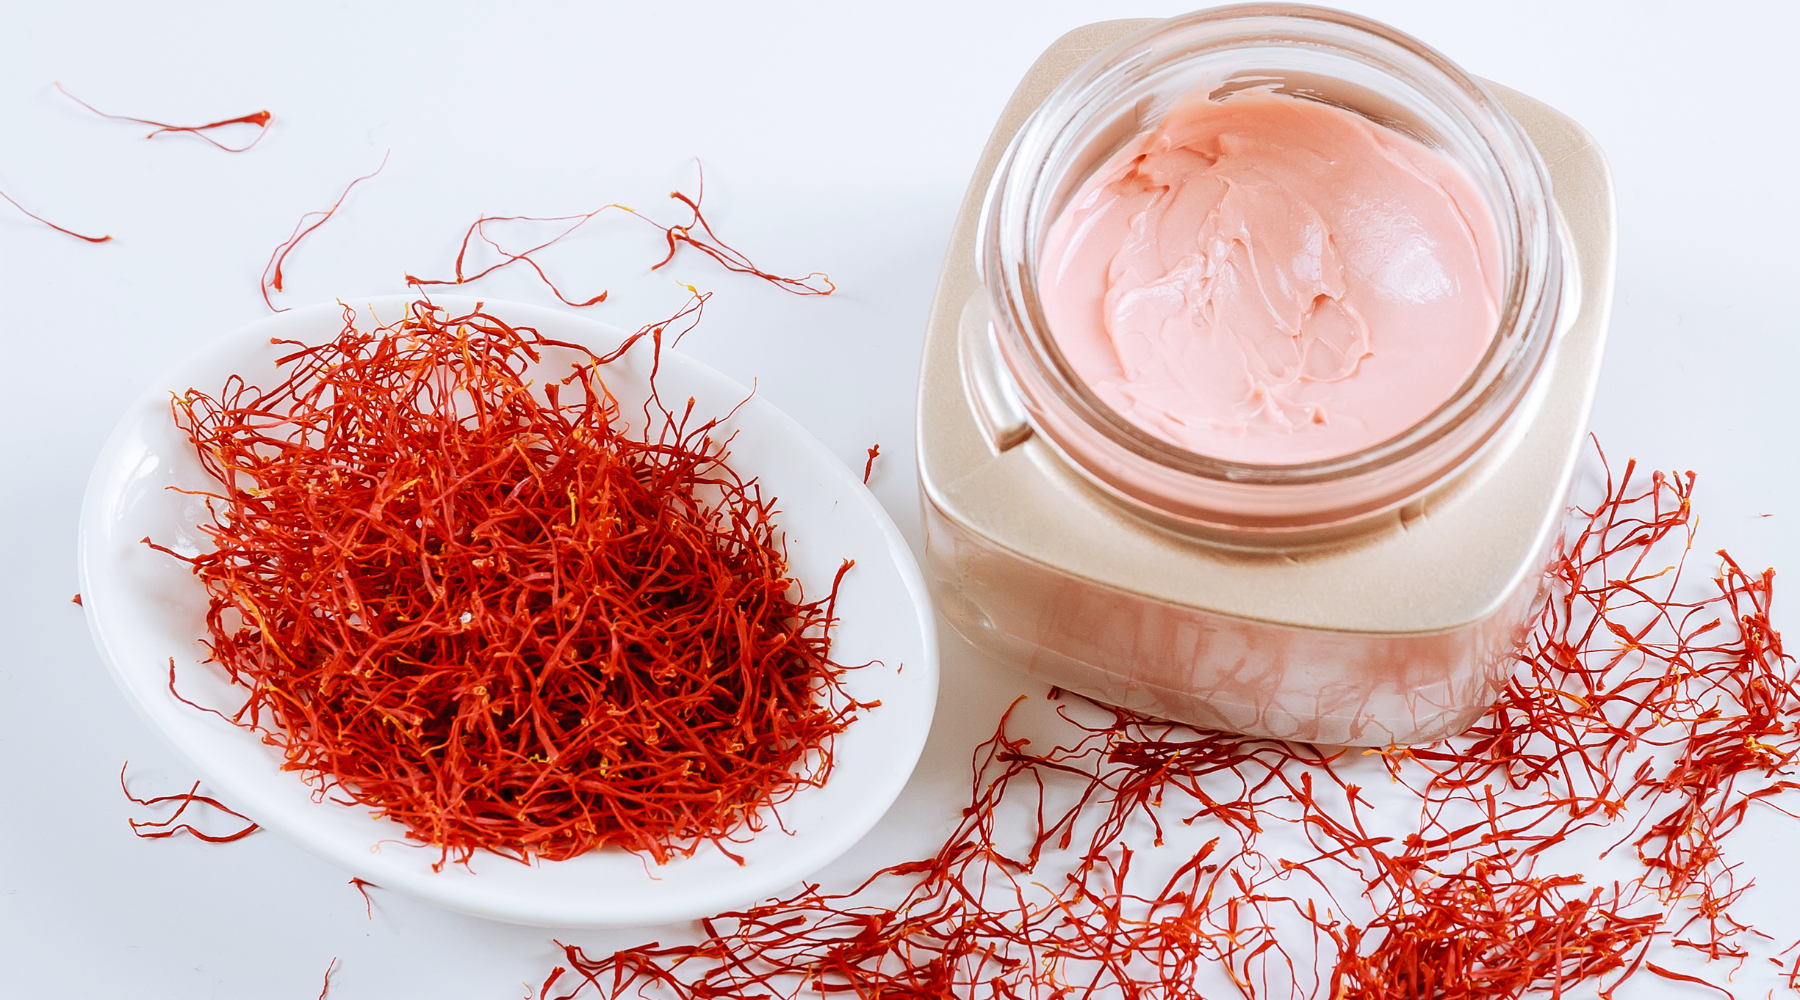 A skincare-focused image featuring a jar of saffron infused face cream and a bowl of dried saffron.